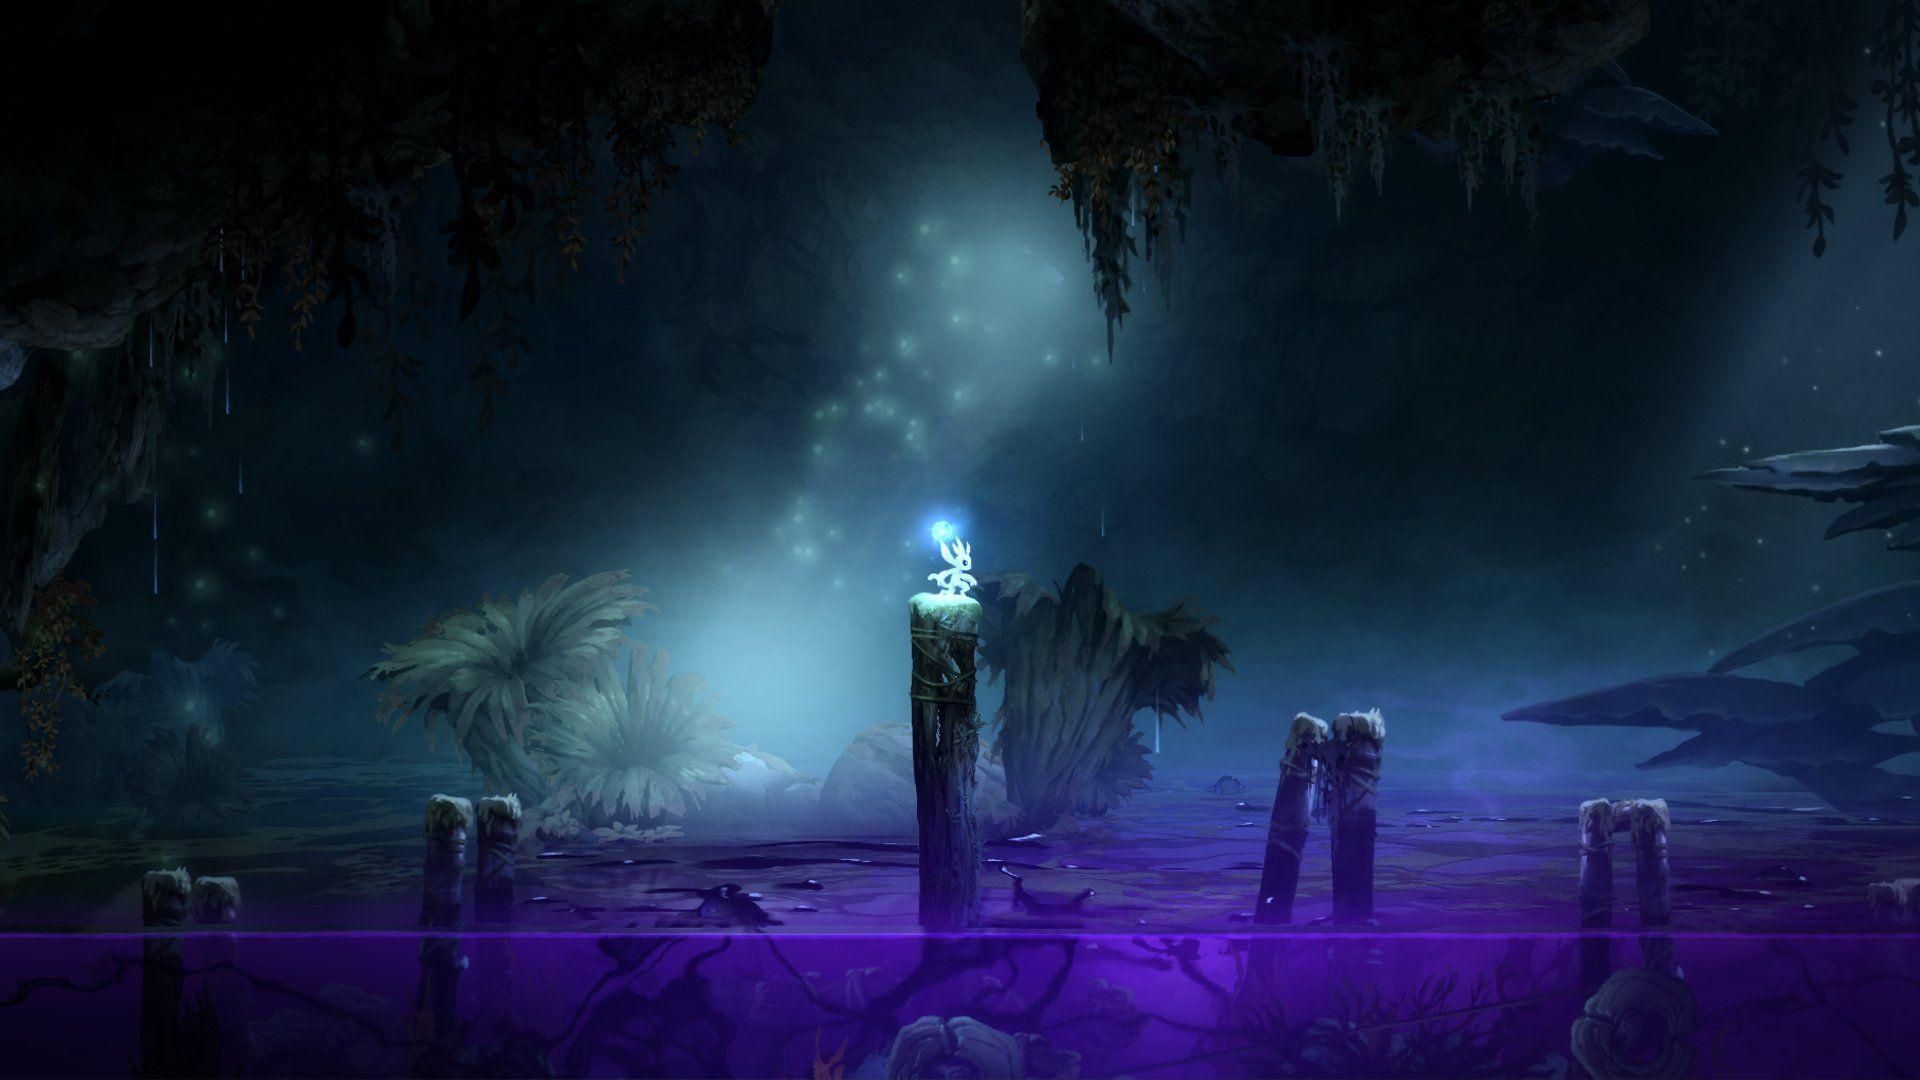 Ori And The Blind Forest Computer Wallpaper, Desktop Background